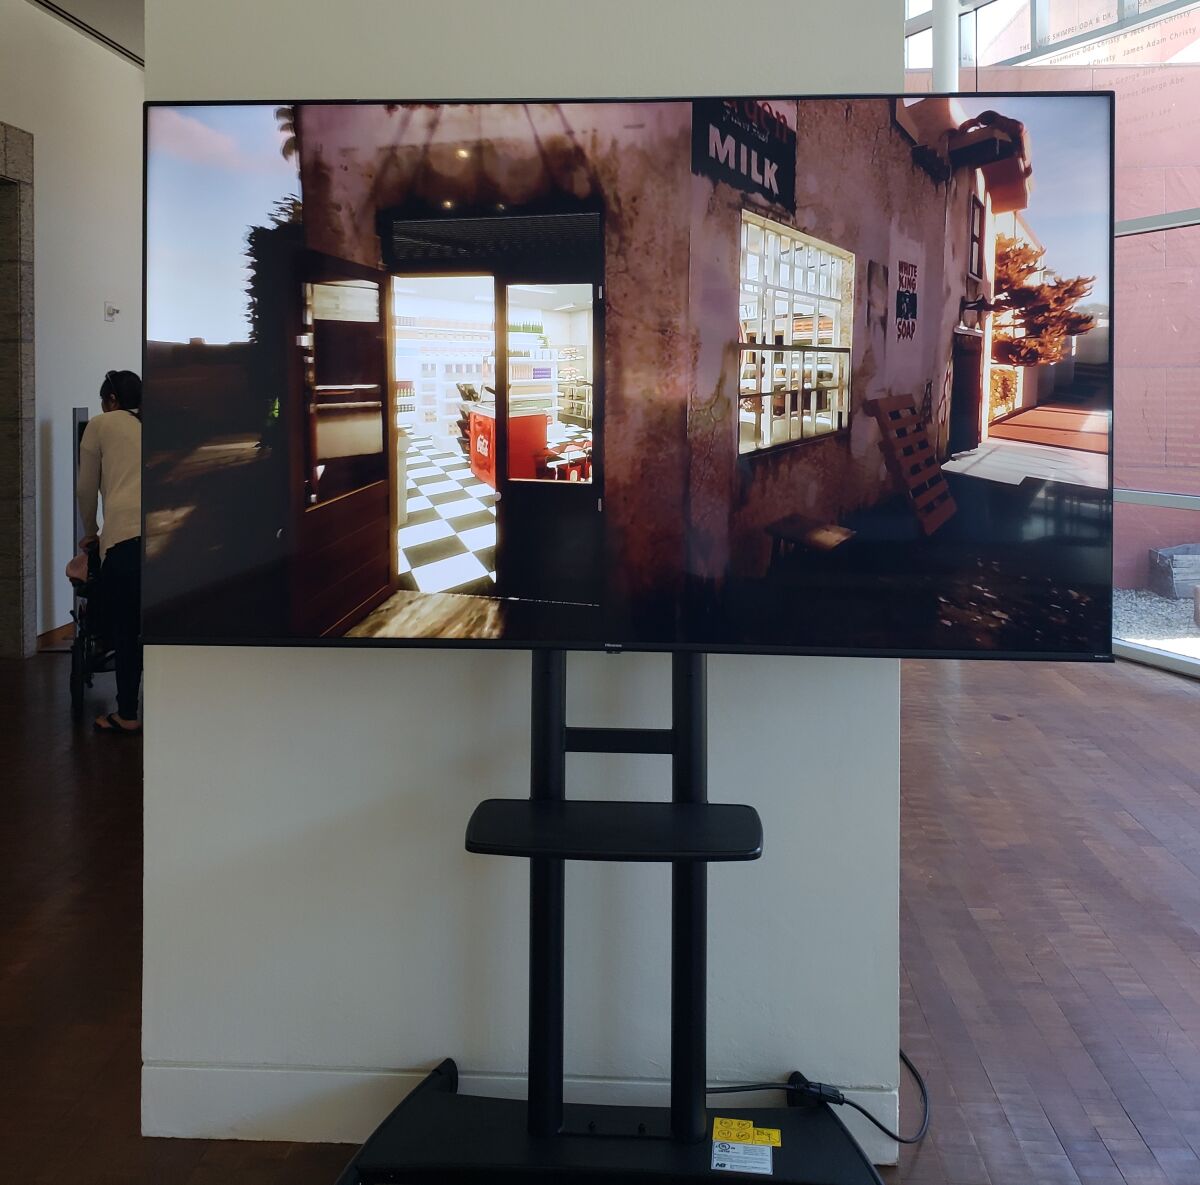 A TV at the entrance of the installation shows a fabricated video tour of long-gone Aki's Market.